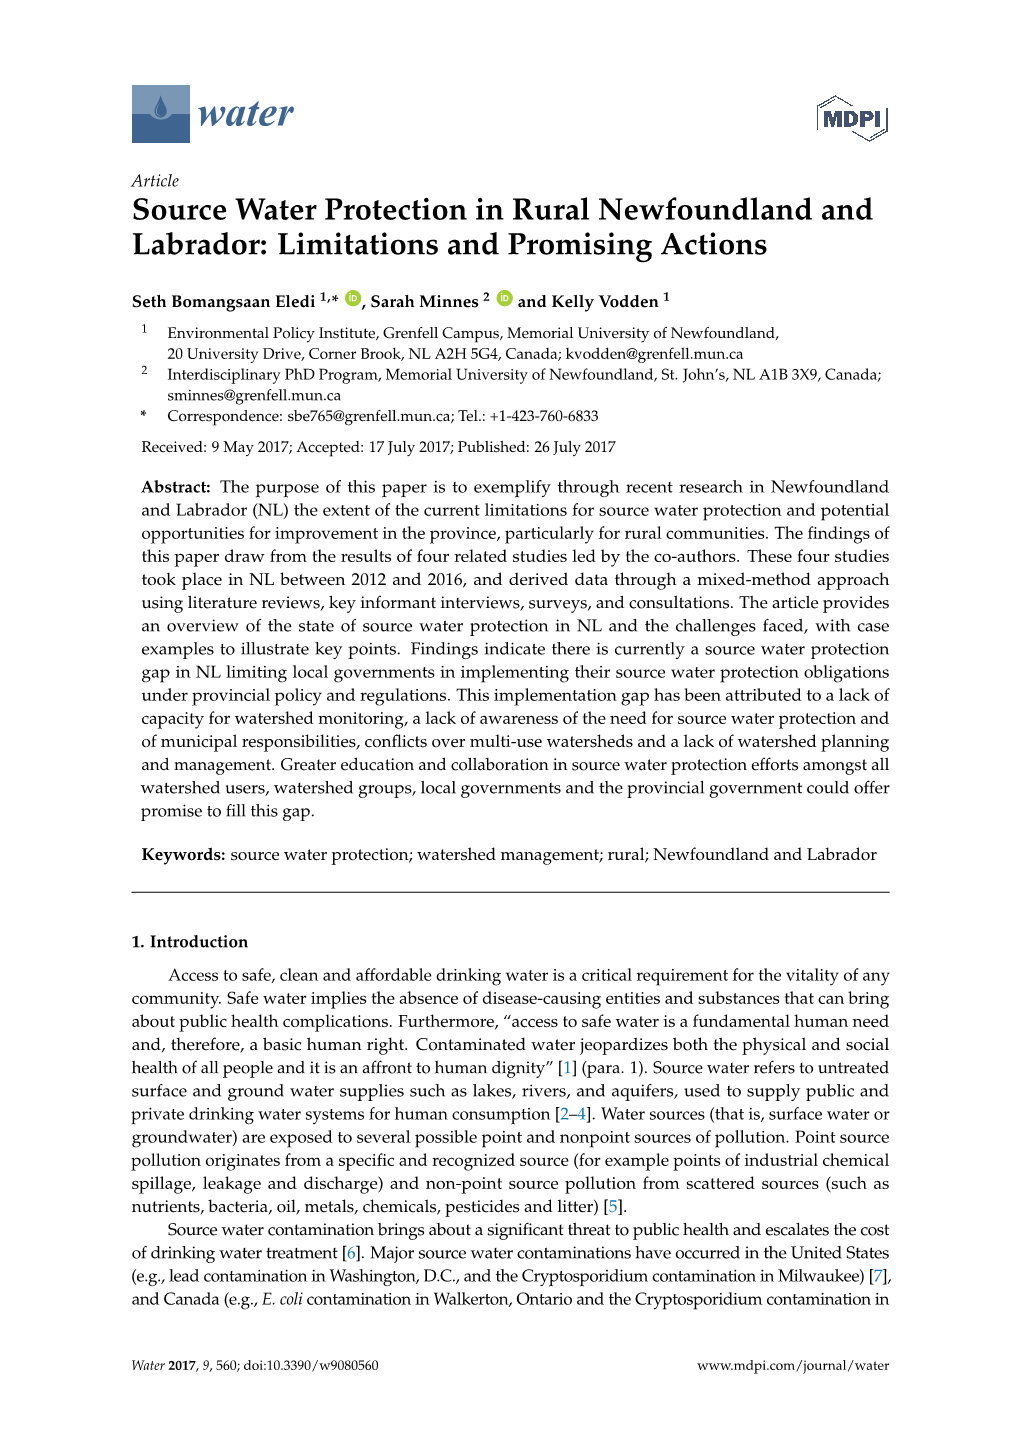 Source Water Protection in Rural Newfoundland and Labrador: Limitations and Promising Actions